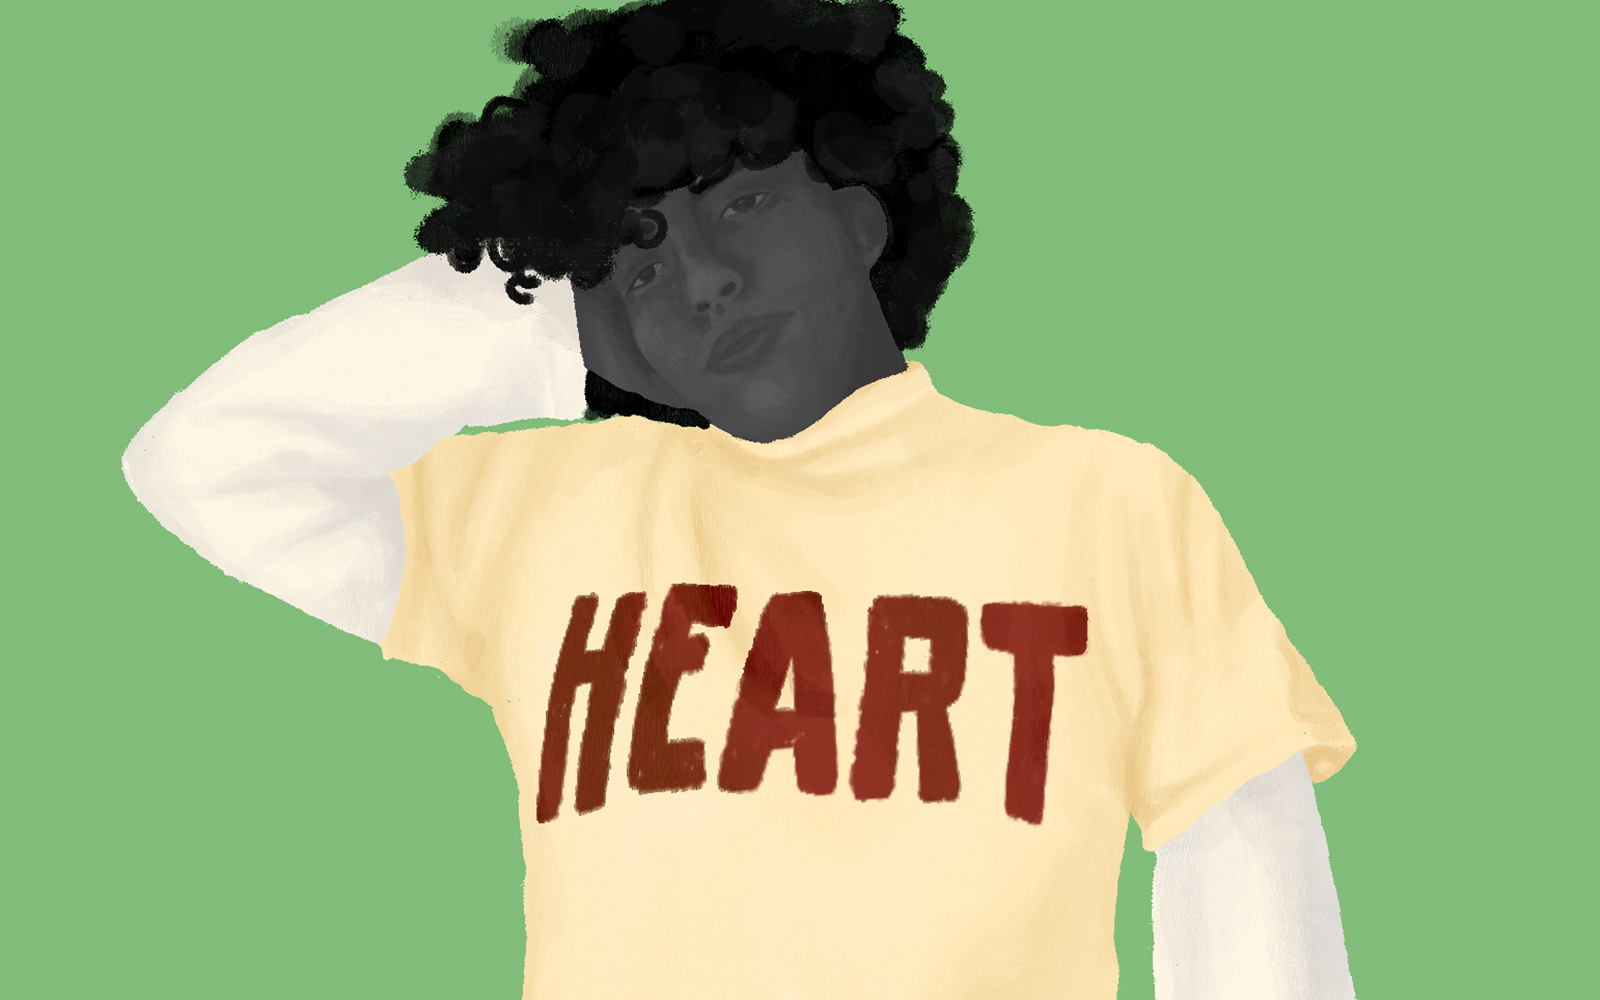 Painting of a person with a t-shirt that says "Heart"